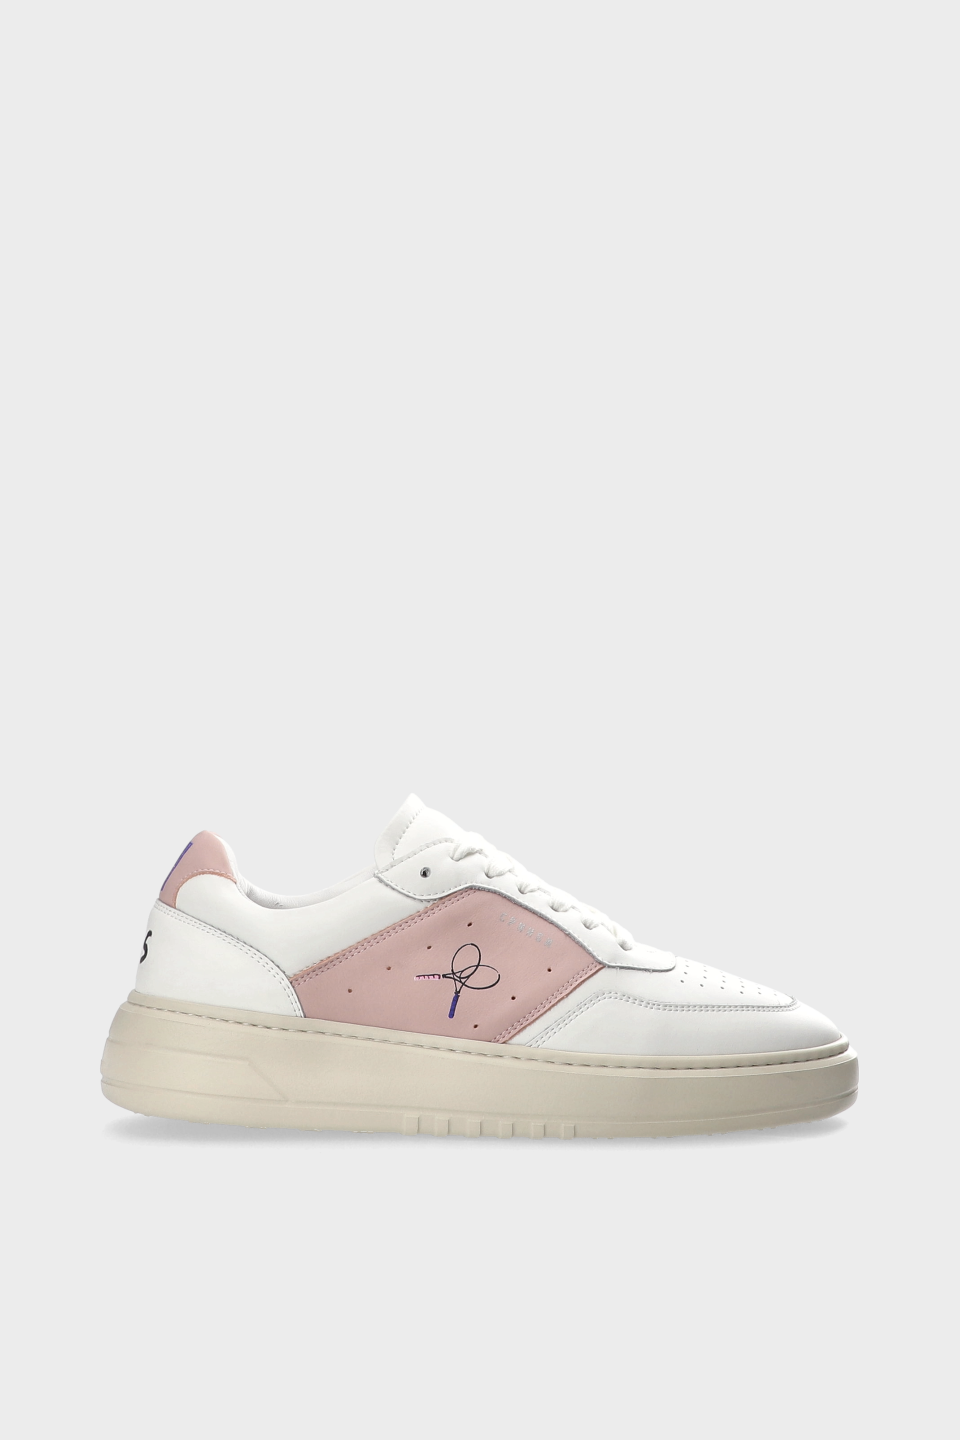 CPH NEW YORK M - leather - white/pink/blue